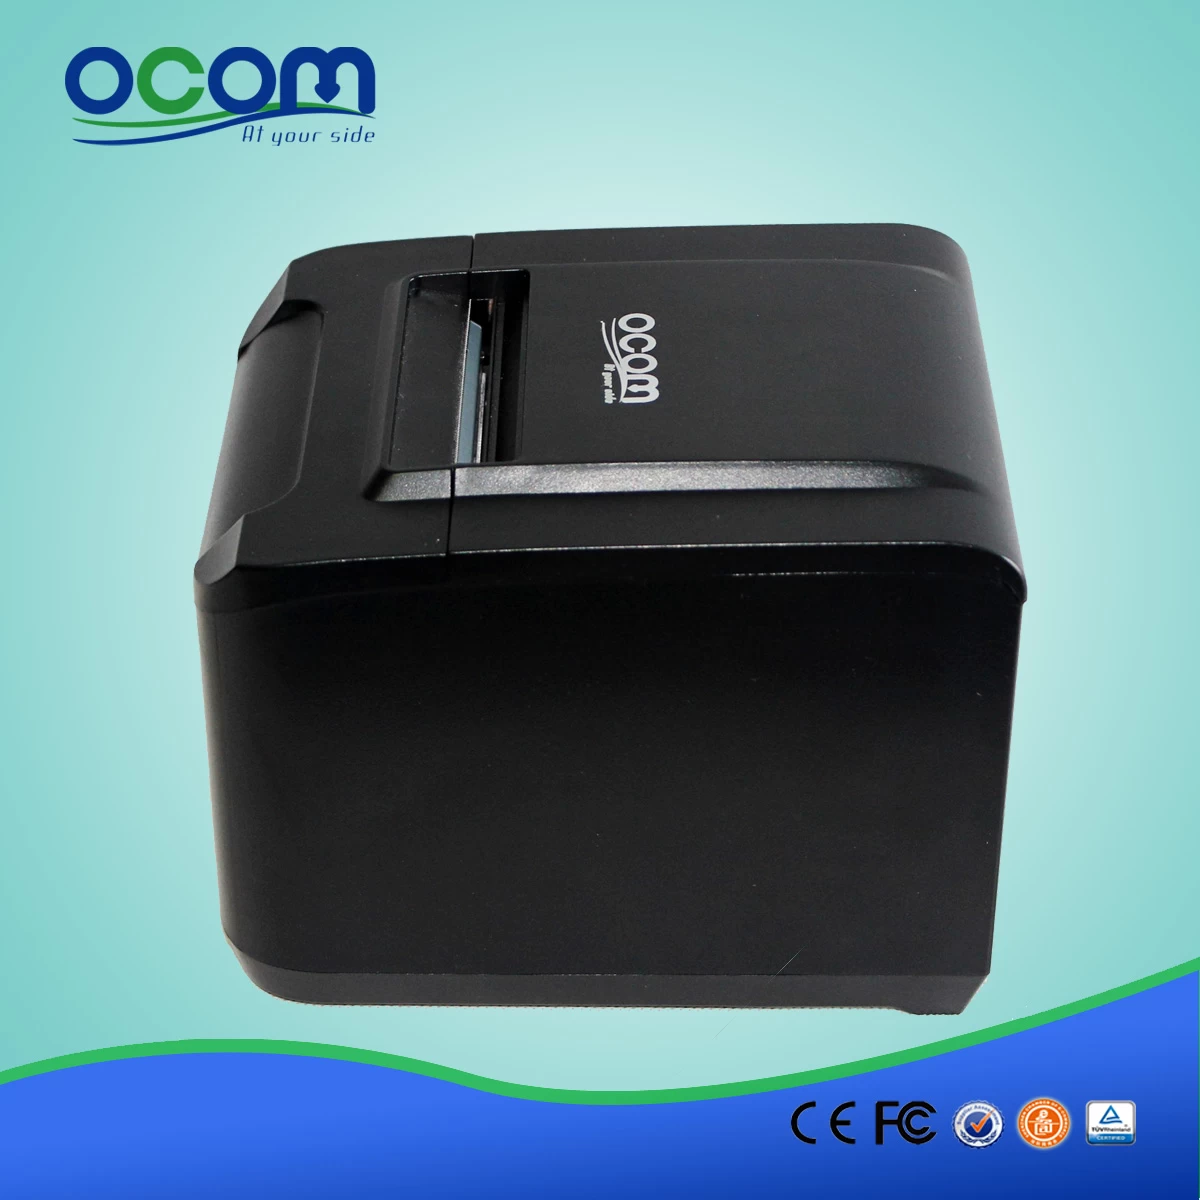 (OCPP-808) 80mm High Speed With Auto-cutter Pos Thermal Receipt Printer